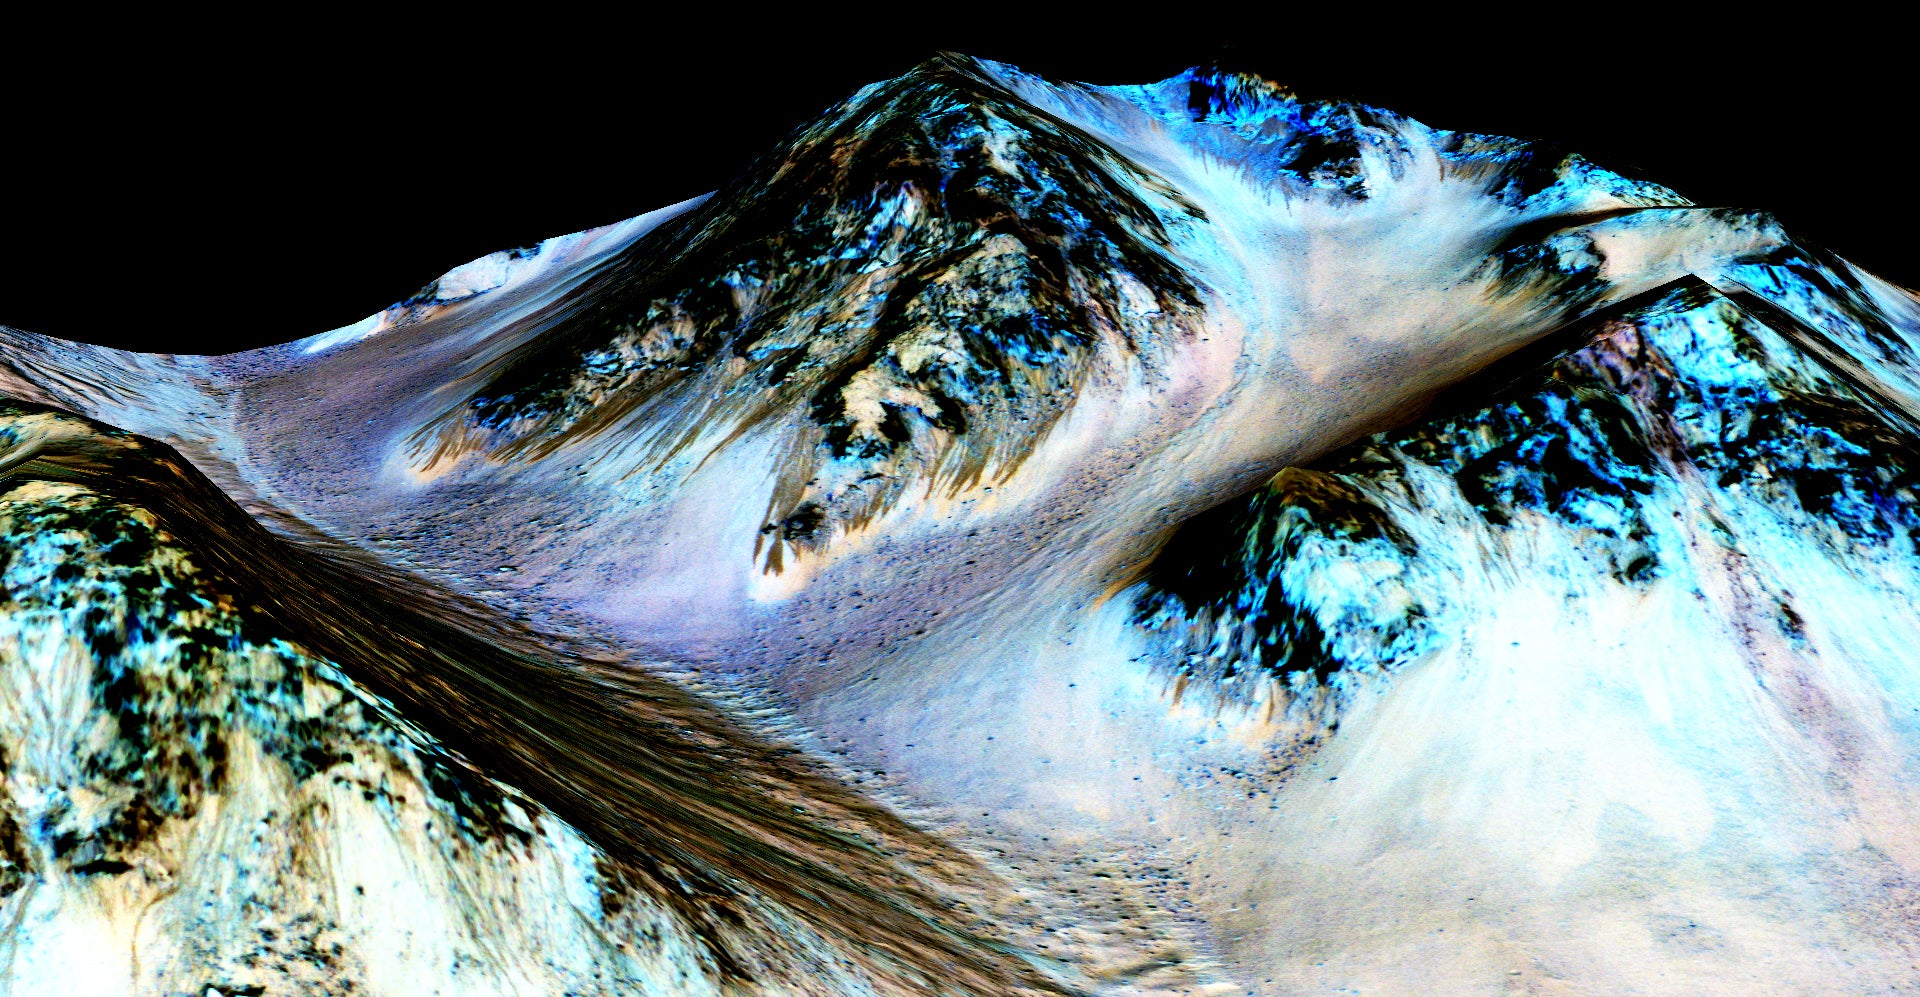 Nasa scientists confirmed that the dark streaks on the Martian surface are caused by flowing salty liquid water